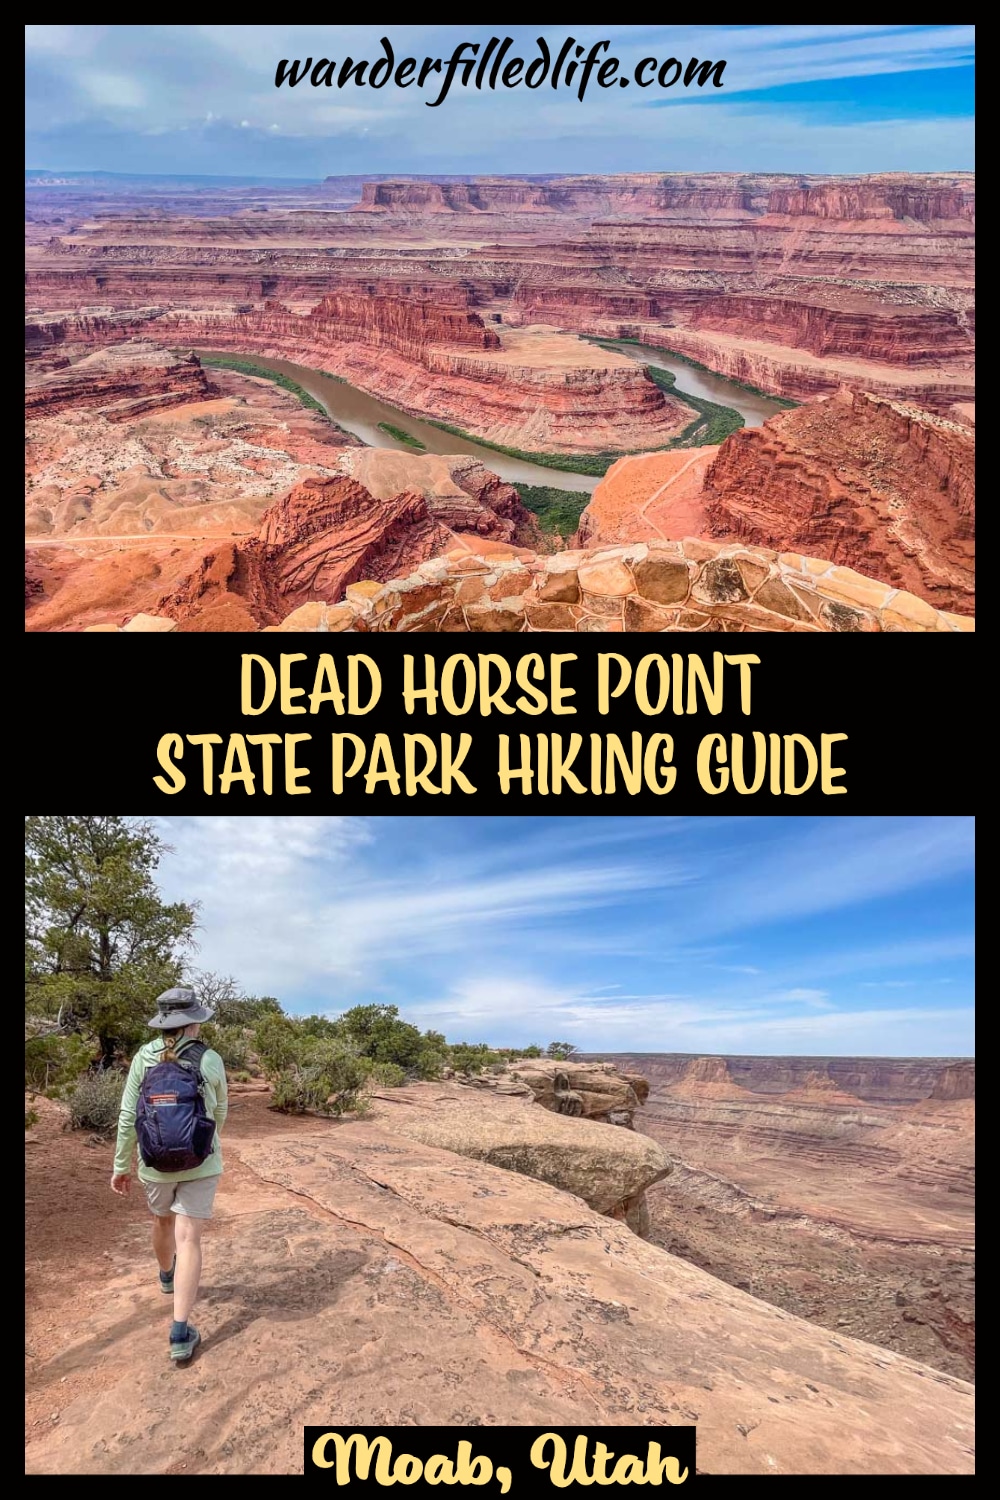 Our guide to hiking at Dead Horse Point State Park, which is one of the best ways to immerse yourself in the canyonlands of southern Utah.